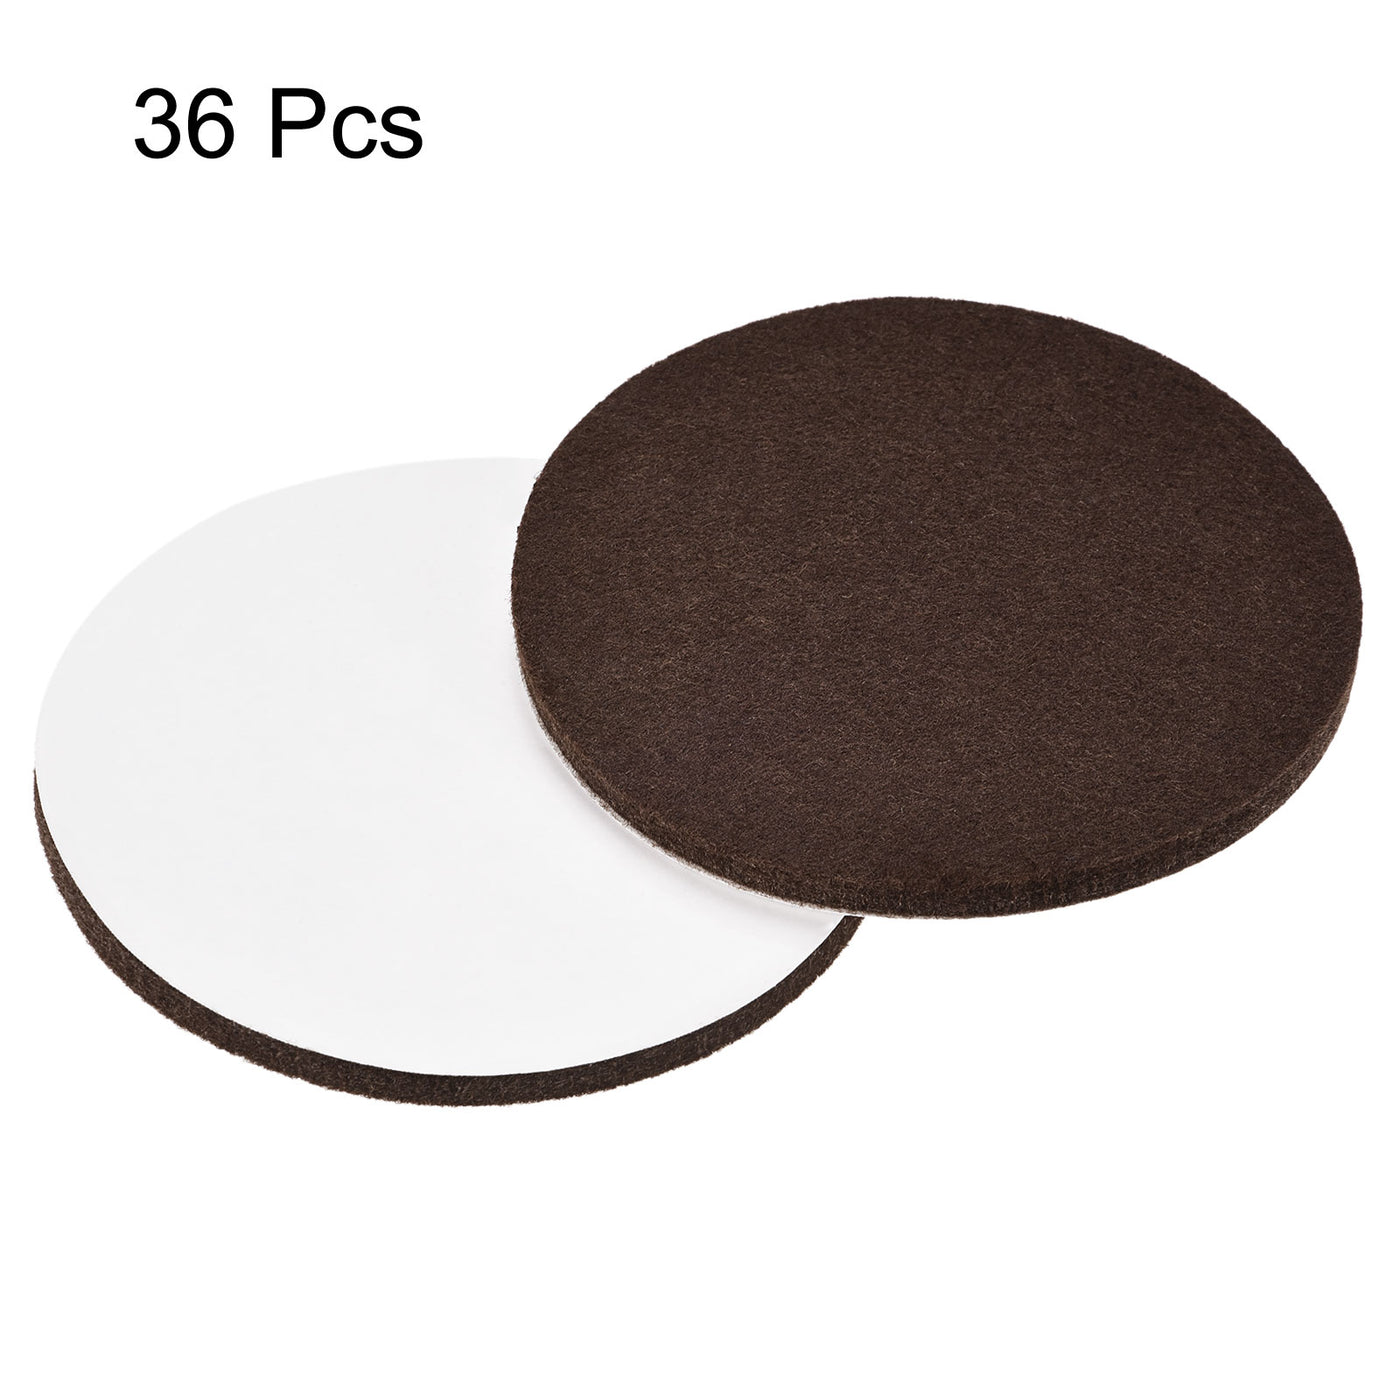 uxcell Uxcell Felt Furniture Pads 90mm Dia Self-stick Anti-scratch Floor Protector Brown 36pcs